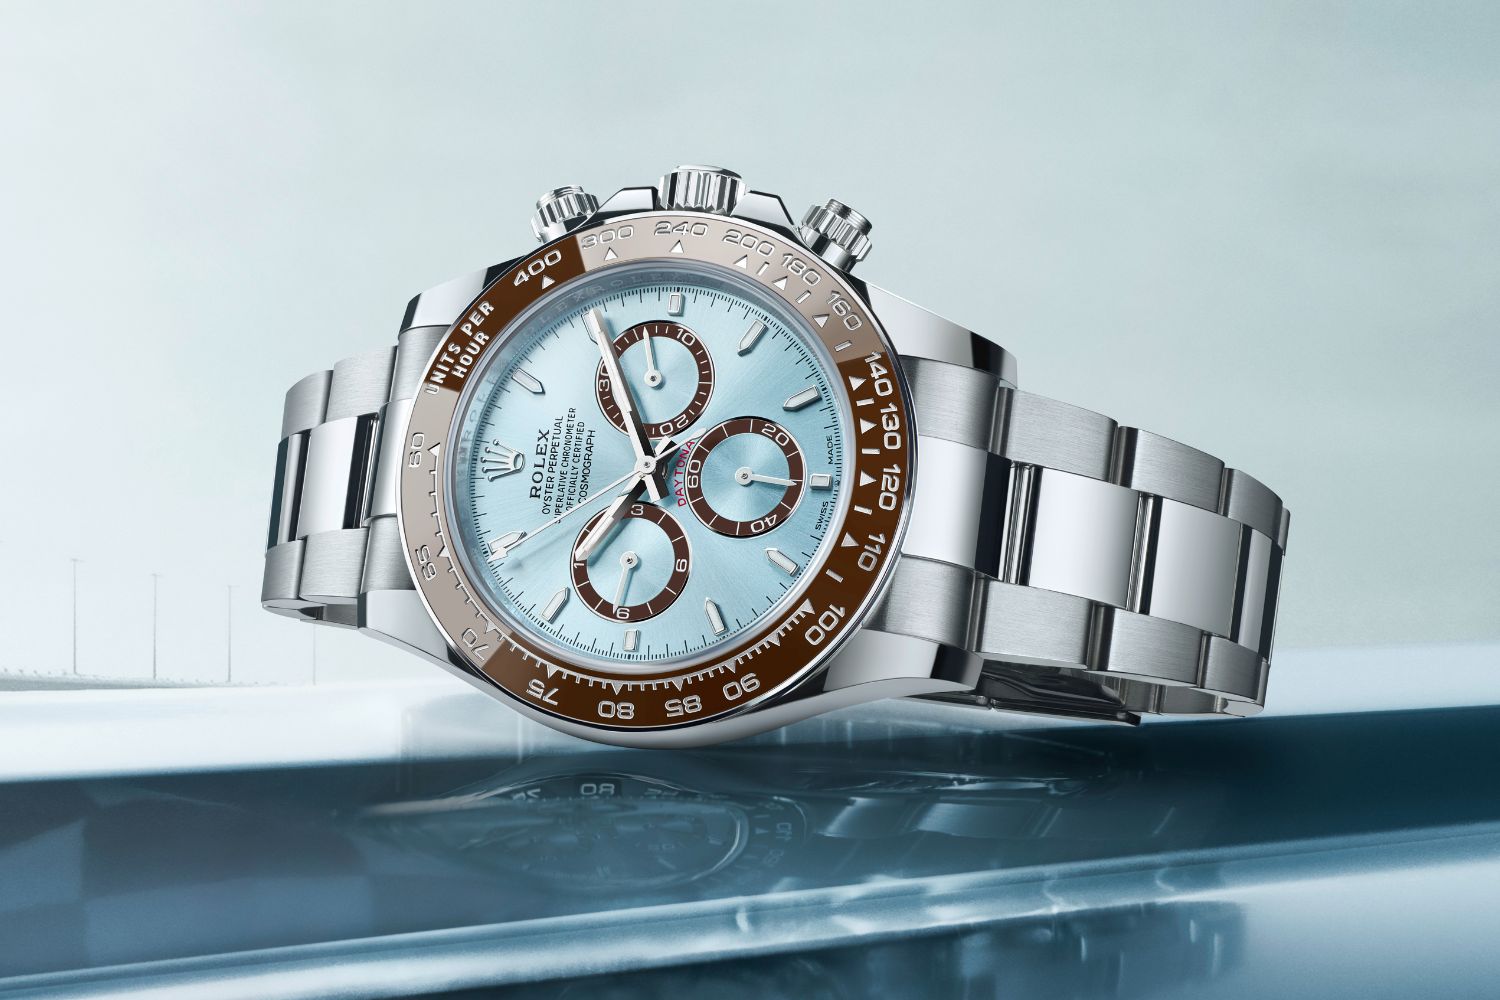 Introducing the Rolex Oyster Perpetual Cosmograph Daytona